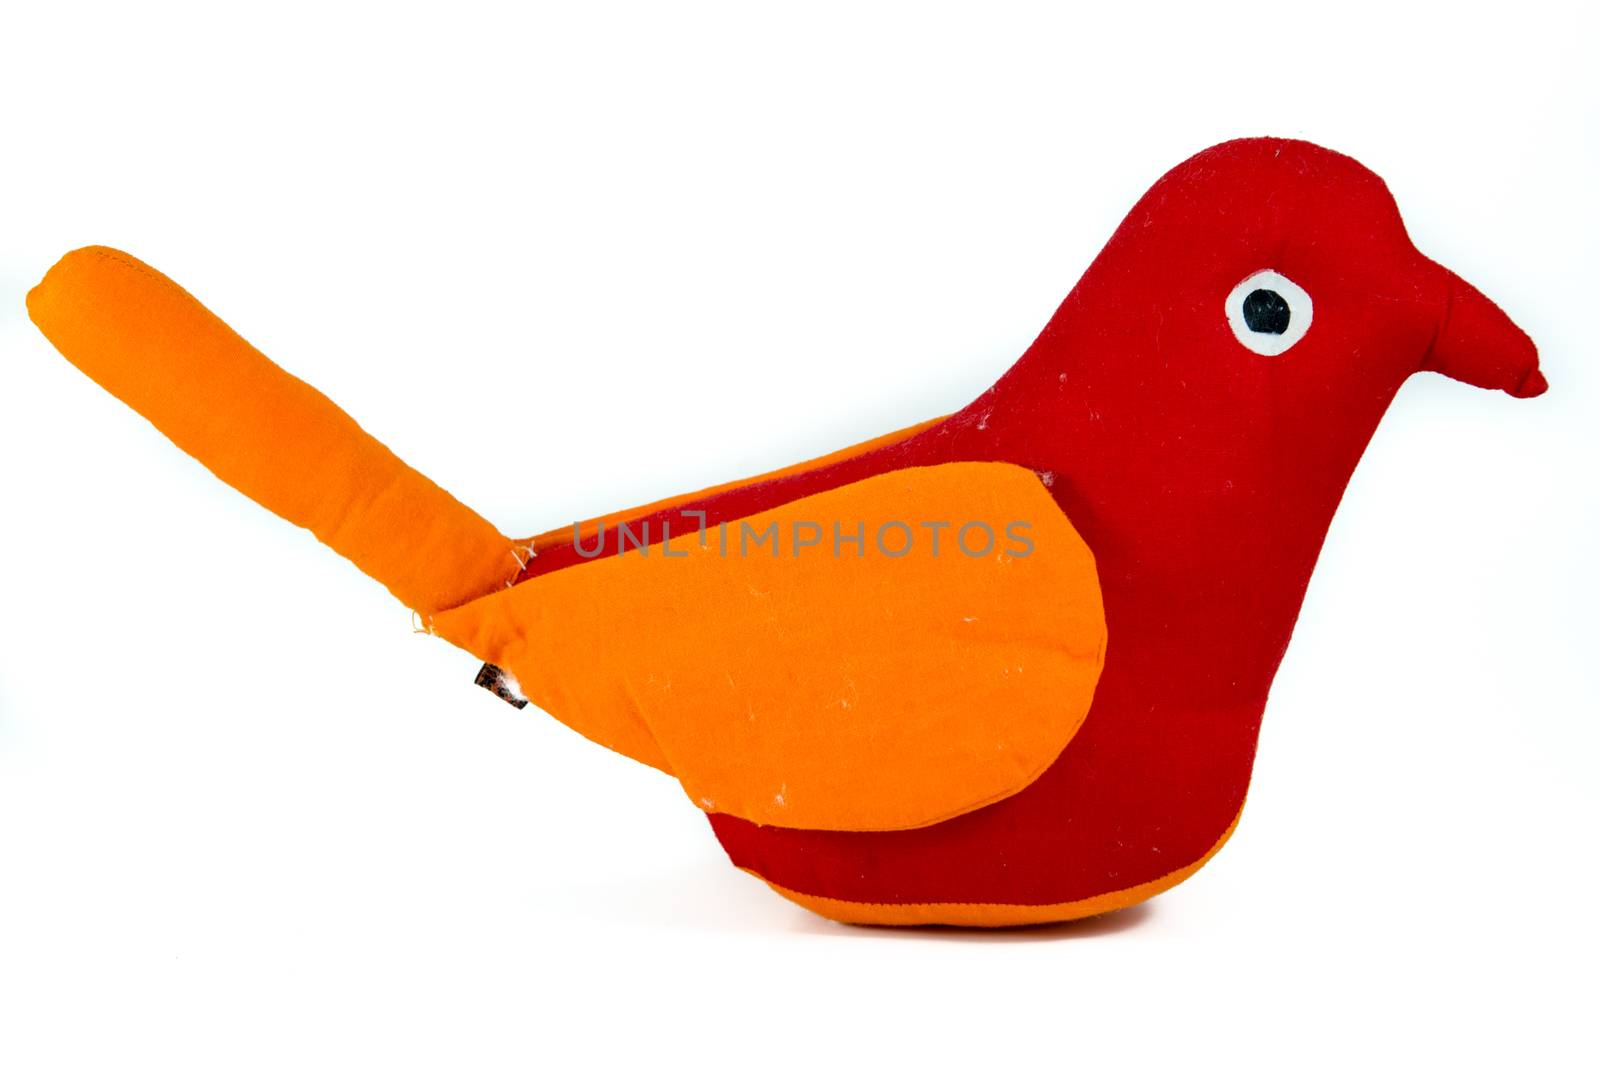 Green Origami bird robin isoated on white background